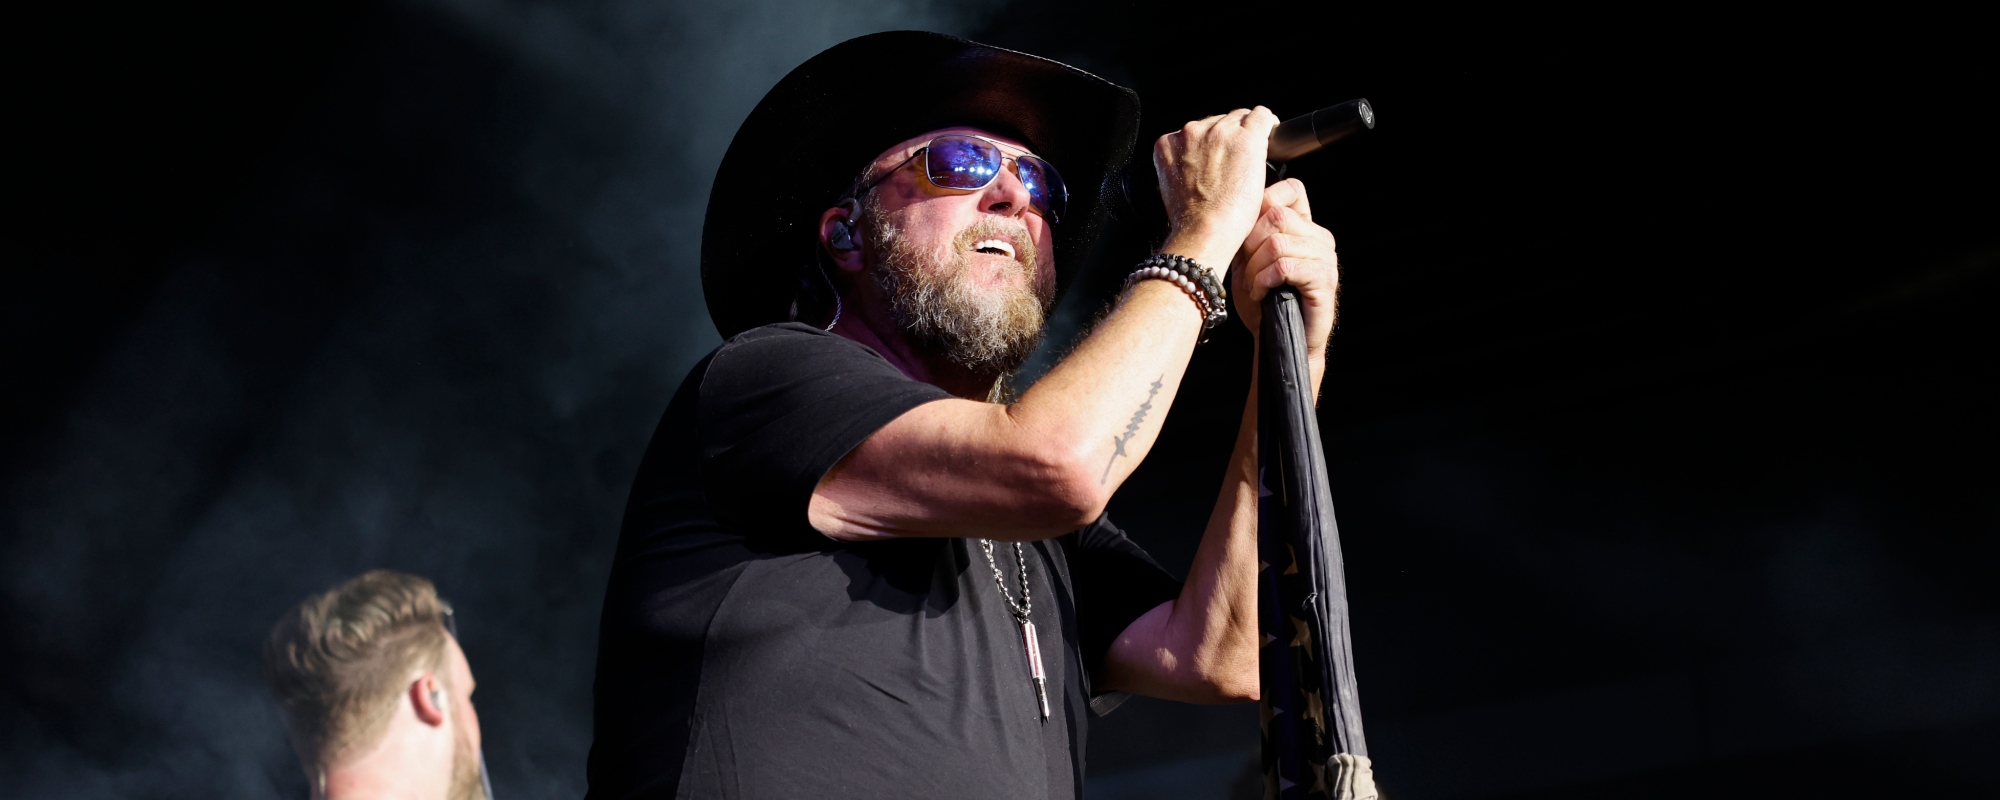 Colt Ford Receives “Good News” Following Heart Attack After Arizona Show, Remains in ICU